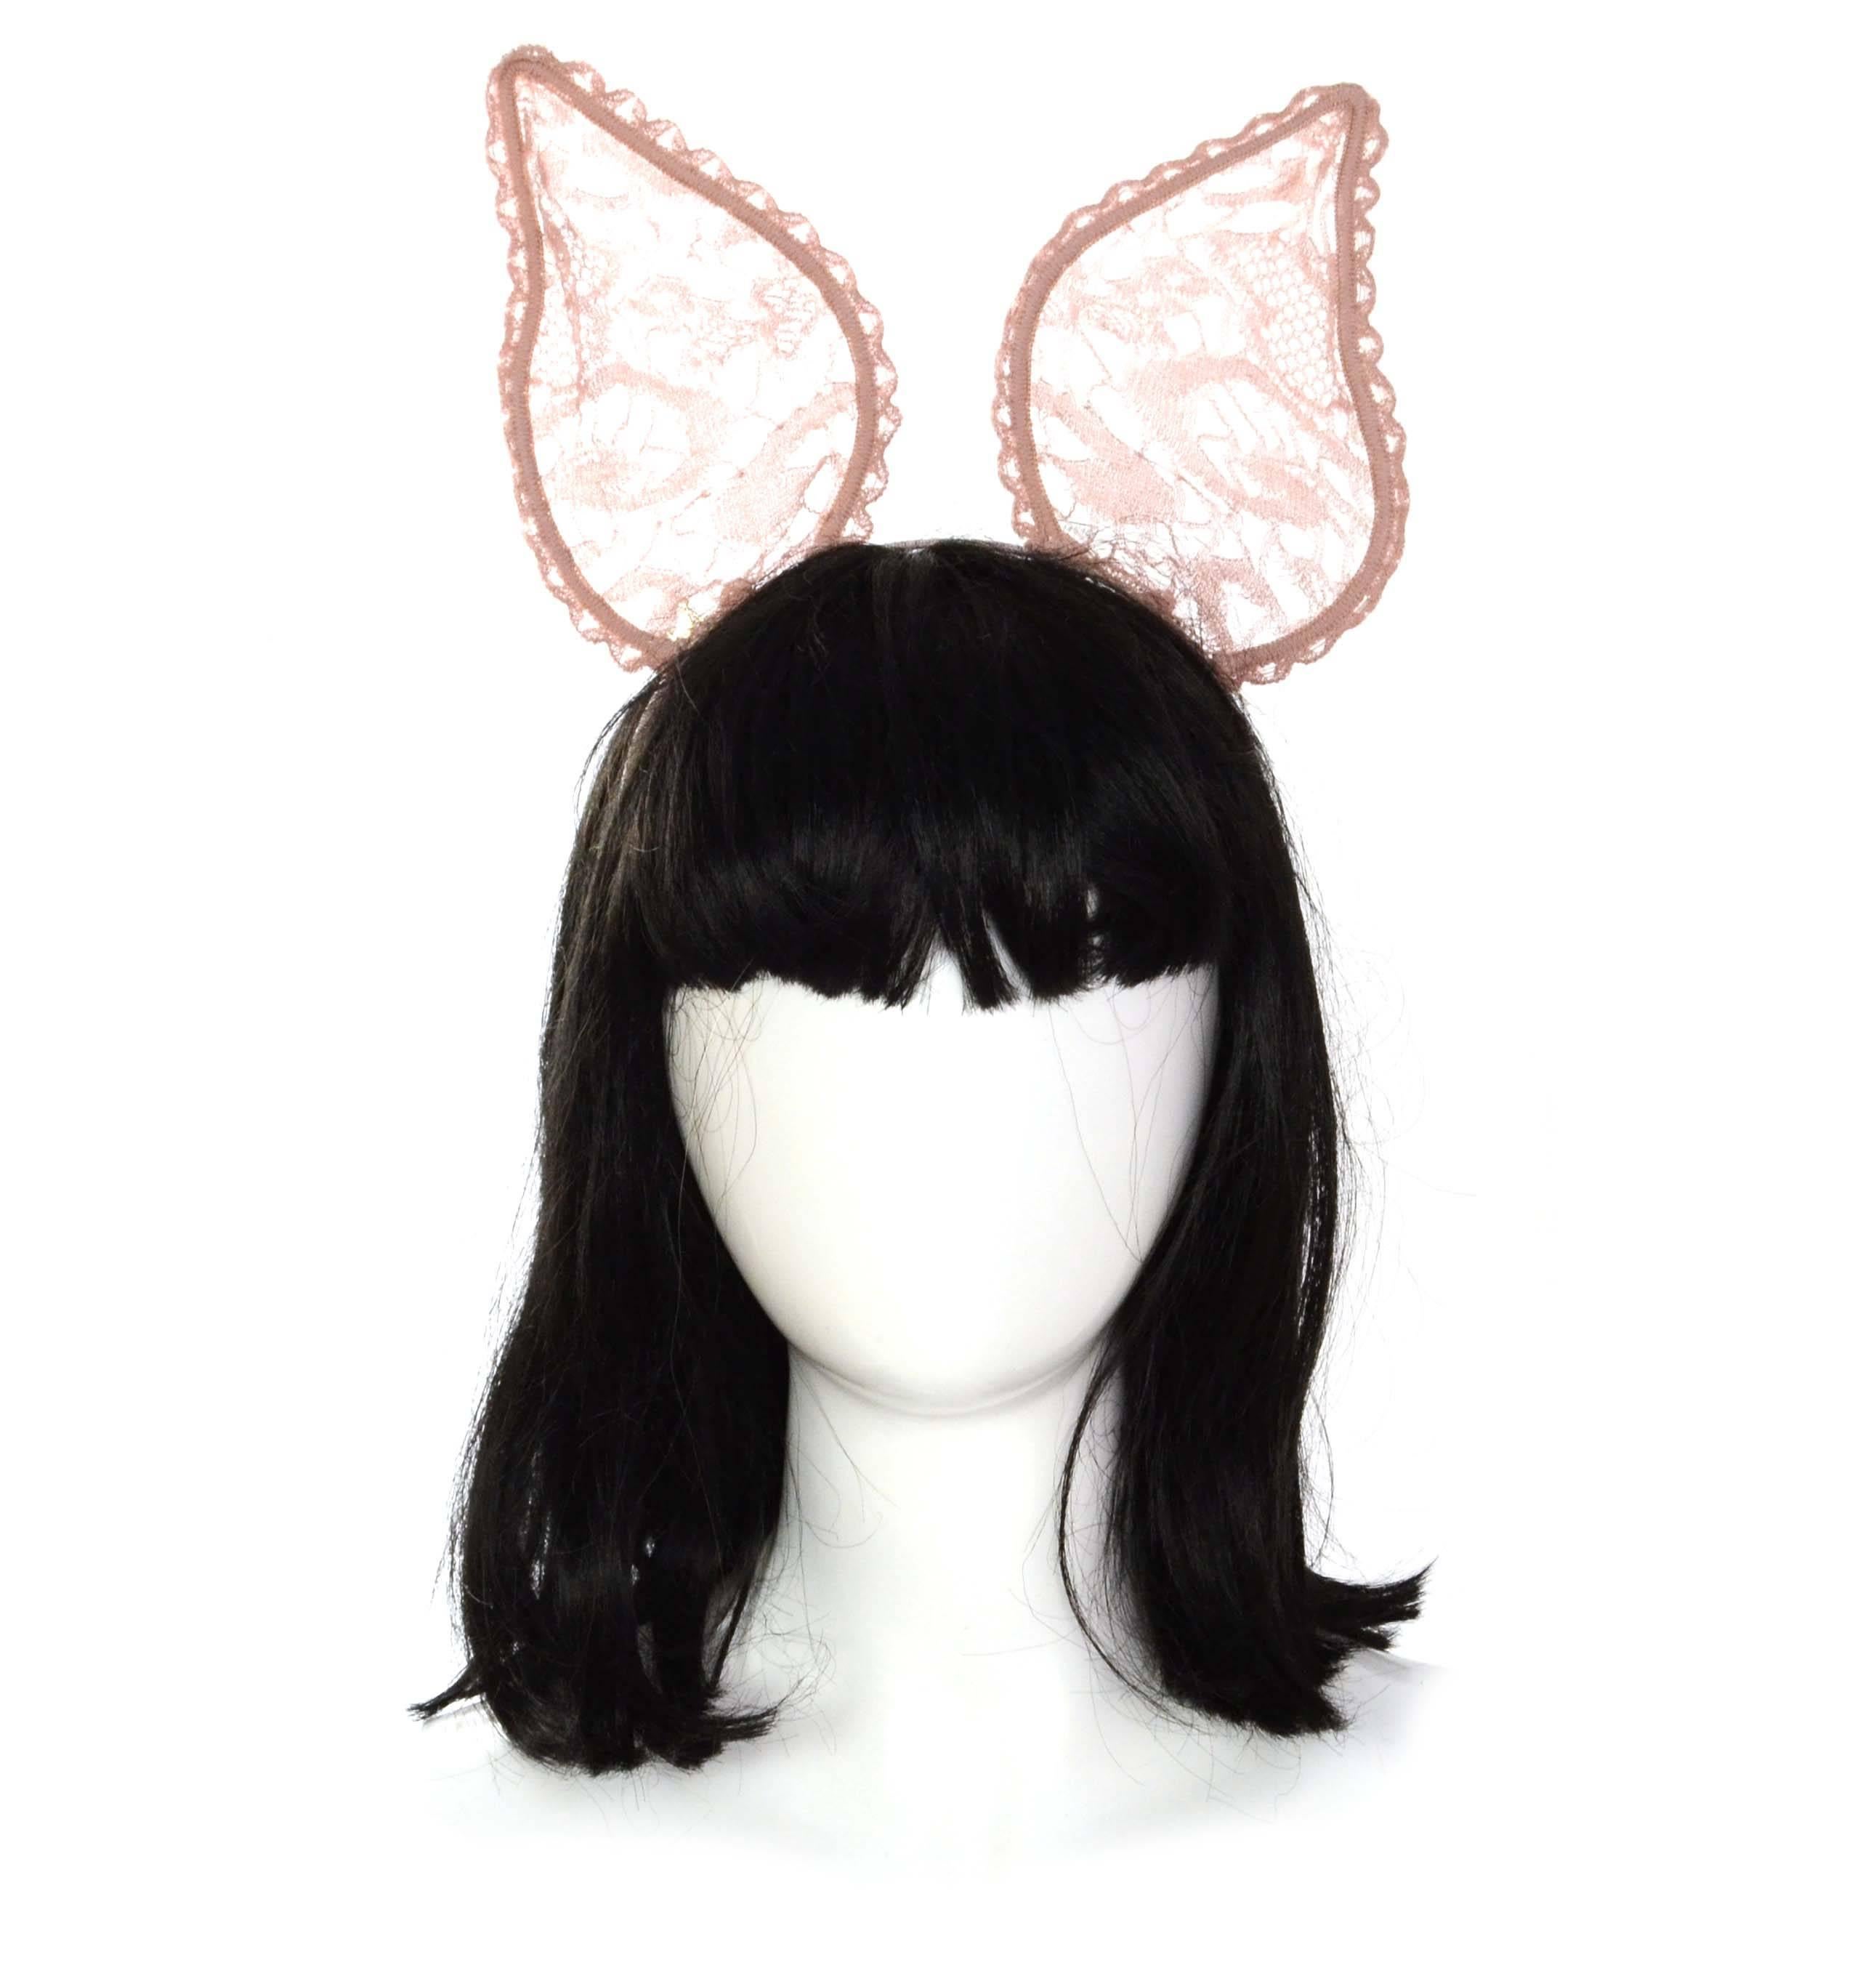 Maison Michel Nude Lace 'Heidi' Bunny Ear Headband 
Features small silvertone and crystal M on one ear
Made In: France
Color: Dusty pink/nude
Composition: Lace, wire, and grosgrain
Overall Condition: Excellent- tag still attached
Retail: